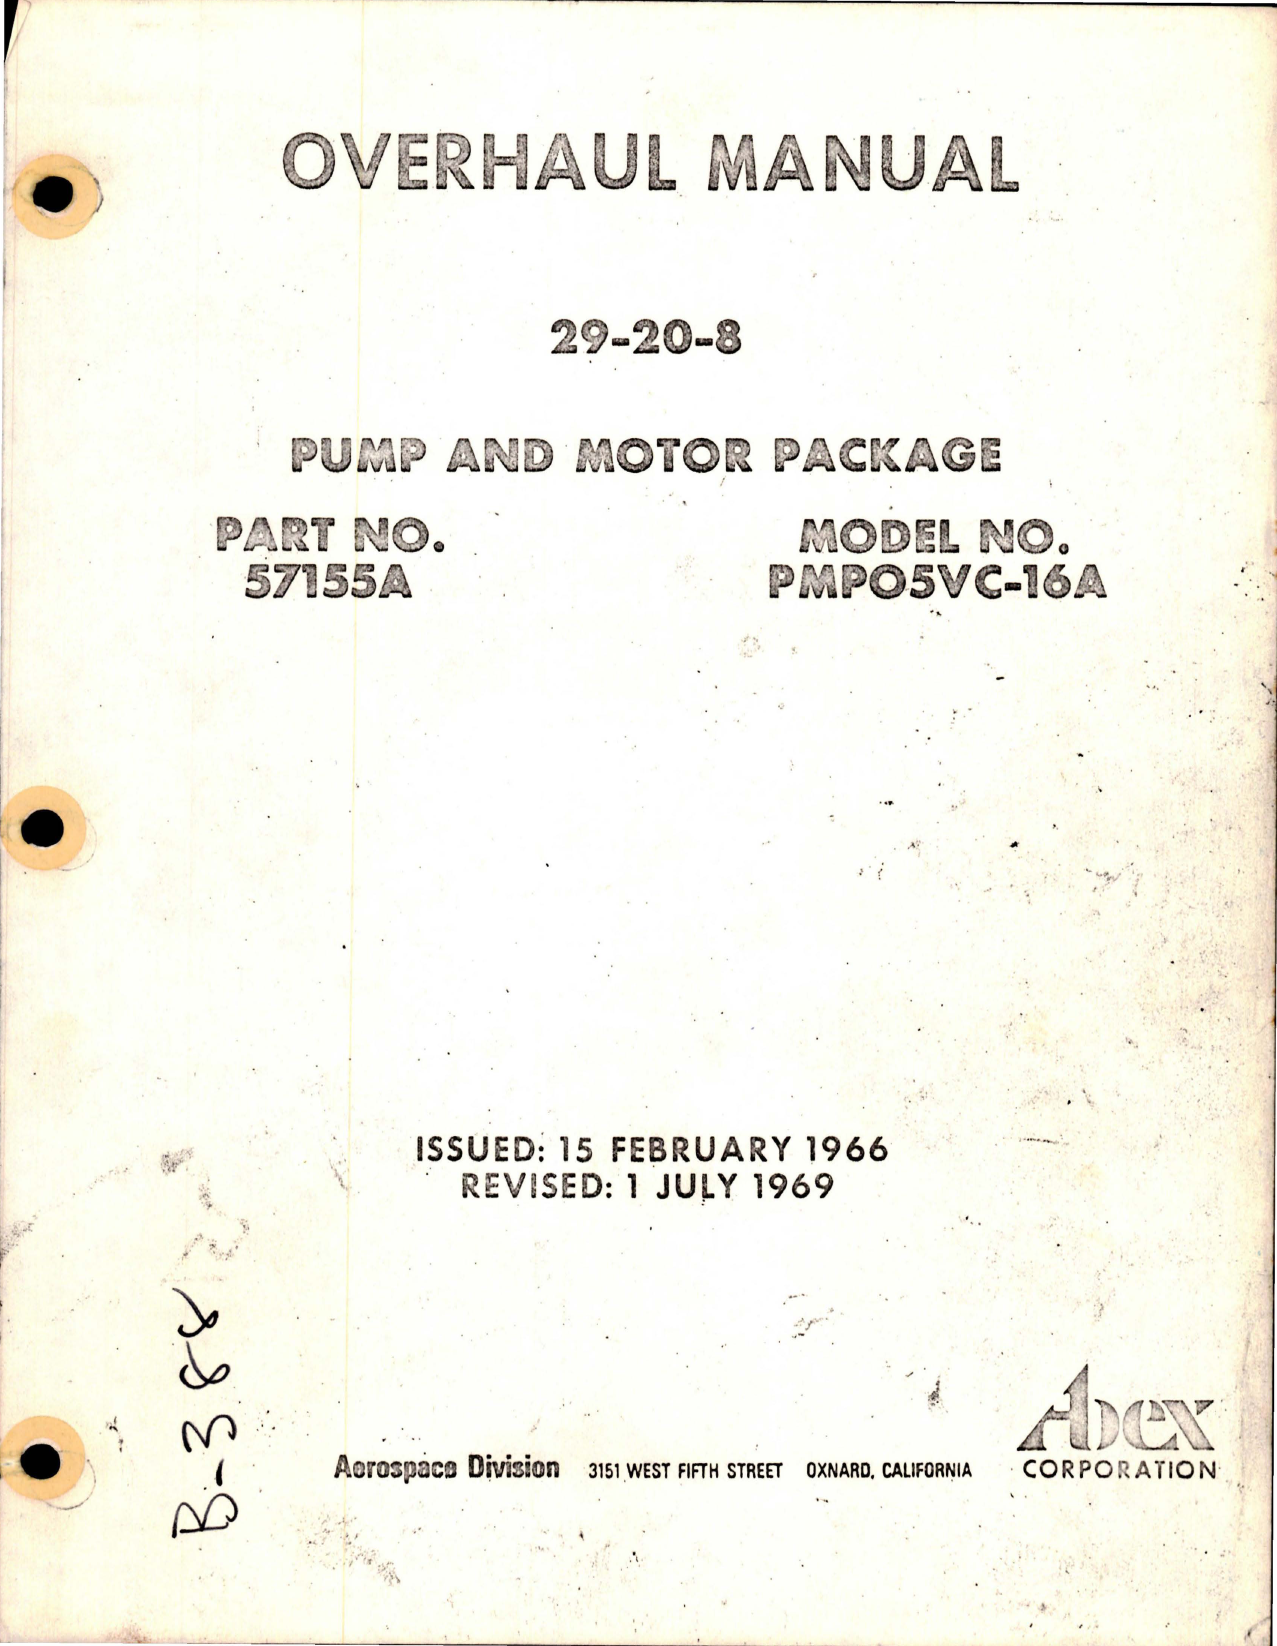 Sample page 1 from AirCorps Library document: Overhaul Manual for Hydraulic Pump and Motor Package - Part 57155A - Model PMP05VC-16A 